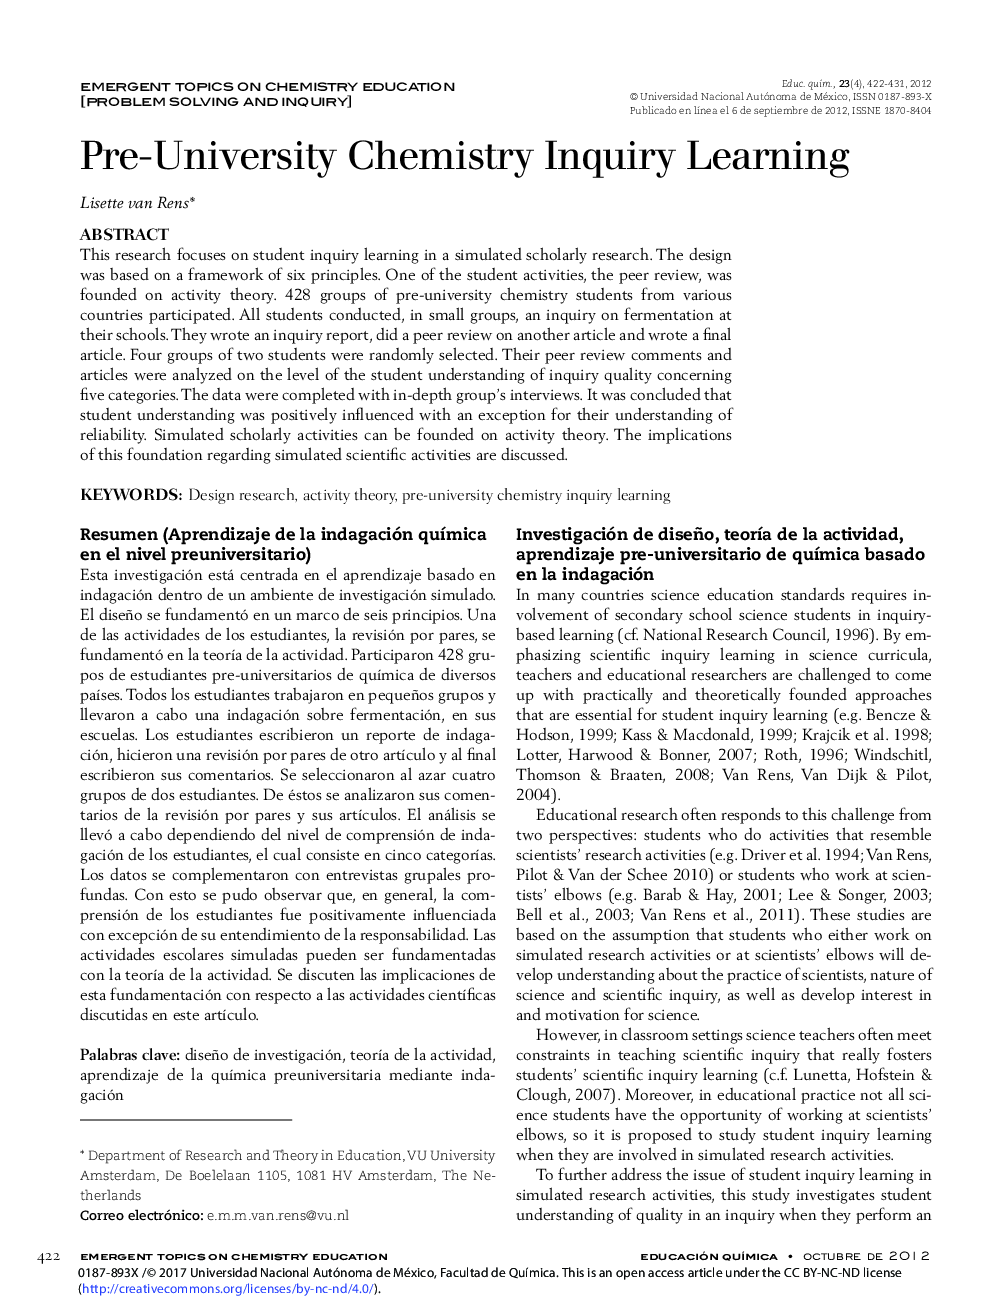 Pre-University Chemistry Inquiry Learning